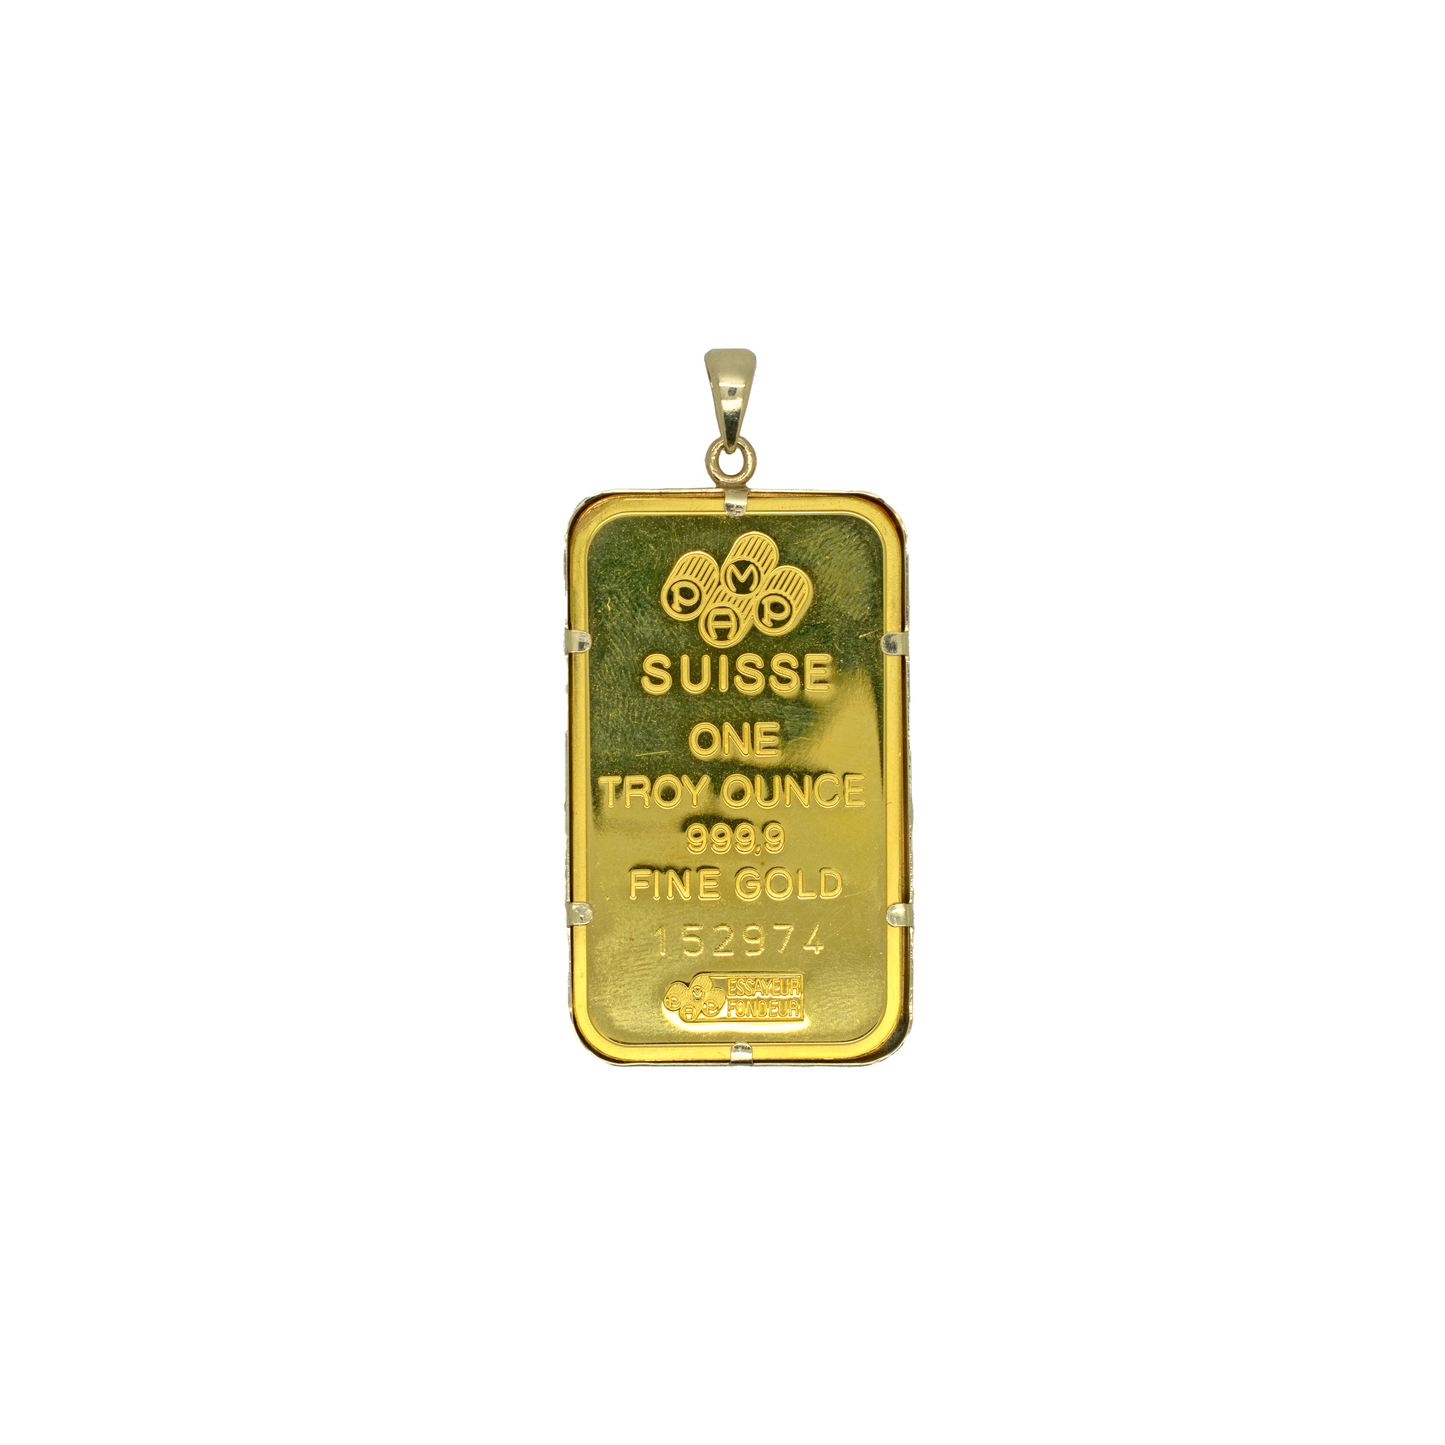 24k Gold Pamp 31.1g with 14k Border